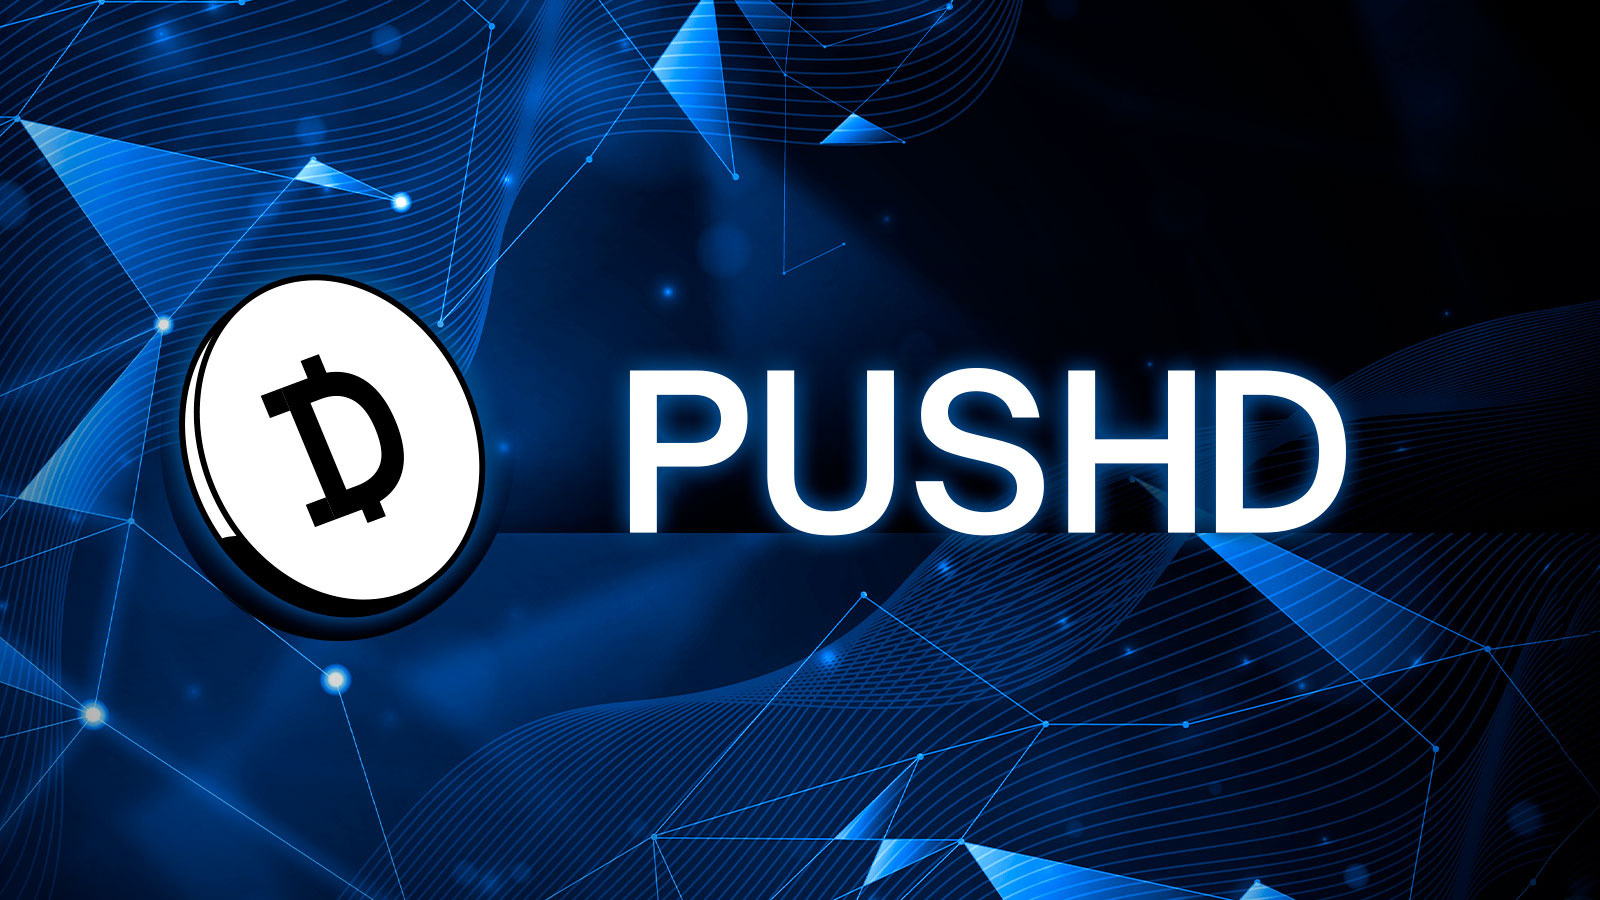 Pushd (PUSHD) Pre-Sale Steals Investors Spotlight as XRP, Cardano (ADA) Remsin in Focus for Altcoin Fans